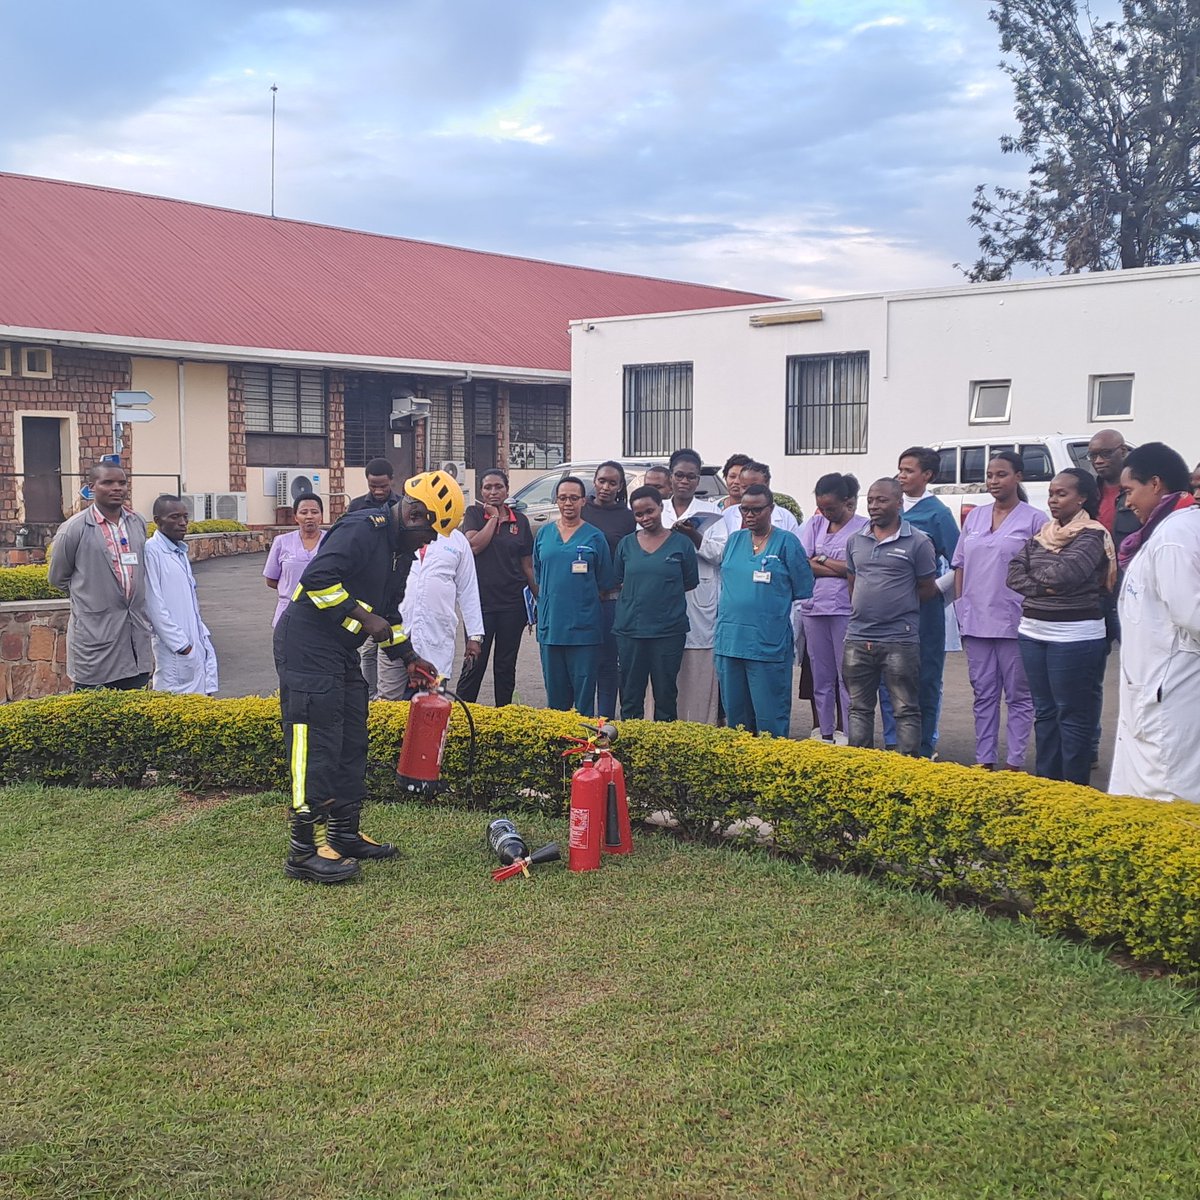 Today, @HospitalChuk staff concluded a 1day training in partnership with @RwandaEmergency and @Rwandapolice /fire brigade to equip CHUK workforce on emergency response & desaster management , which has been a global issue.